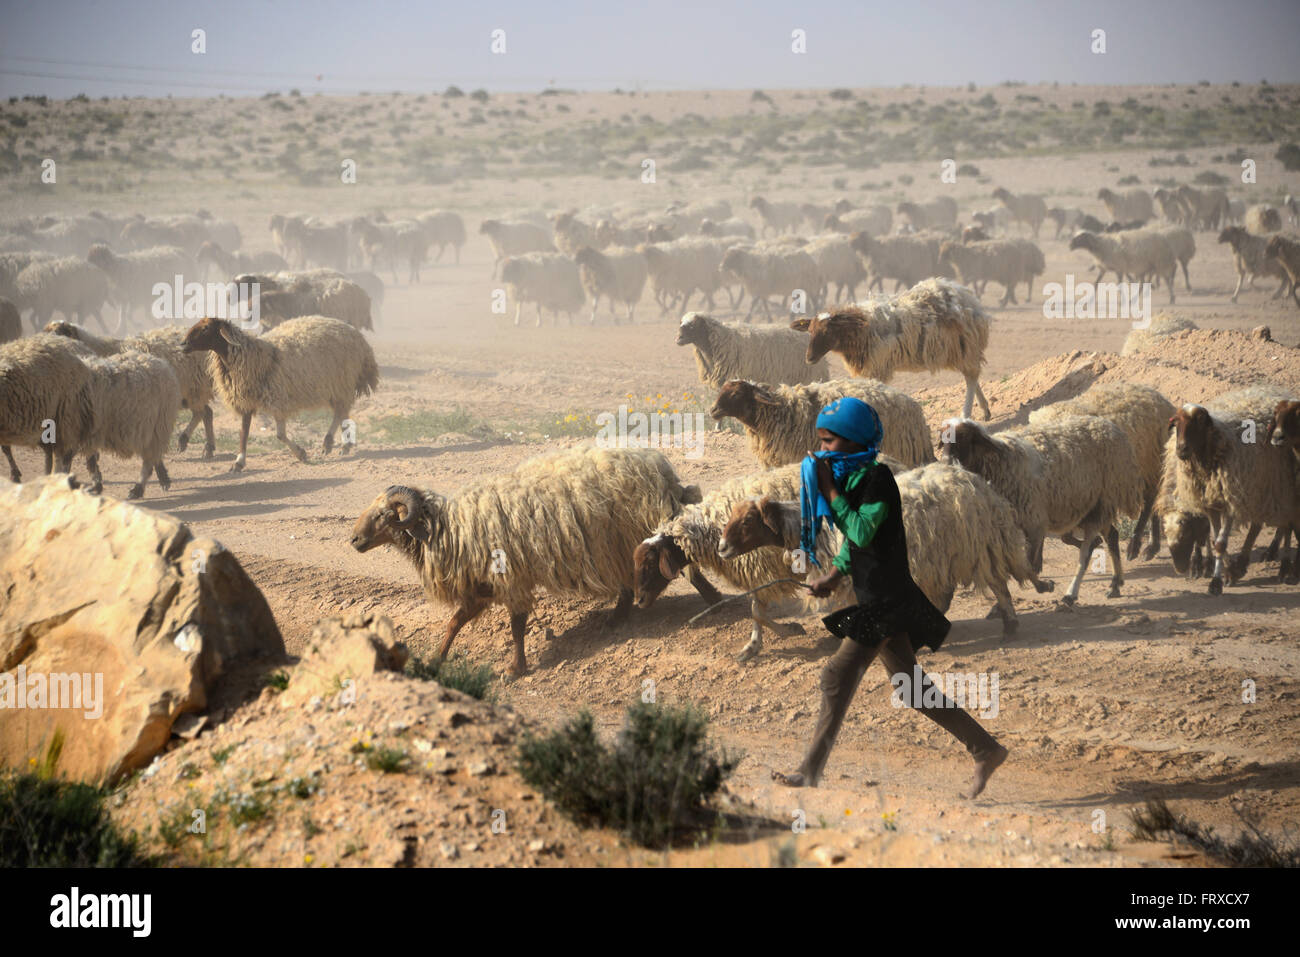 Nomad with flock of sheep along street 211 in Shivta Nationl Park, Desert of Negev, South-Israel, Israel Stock Photo